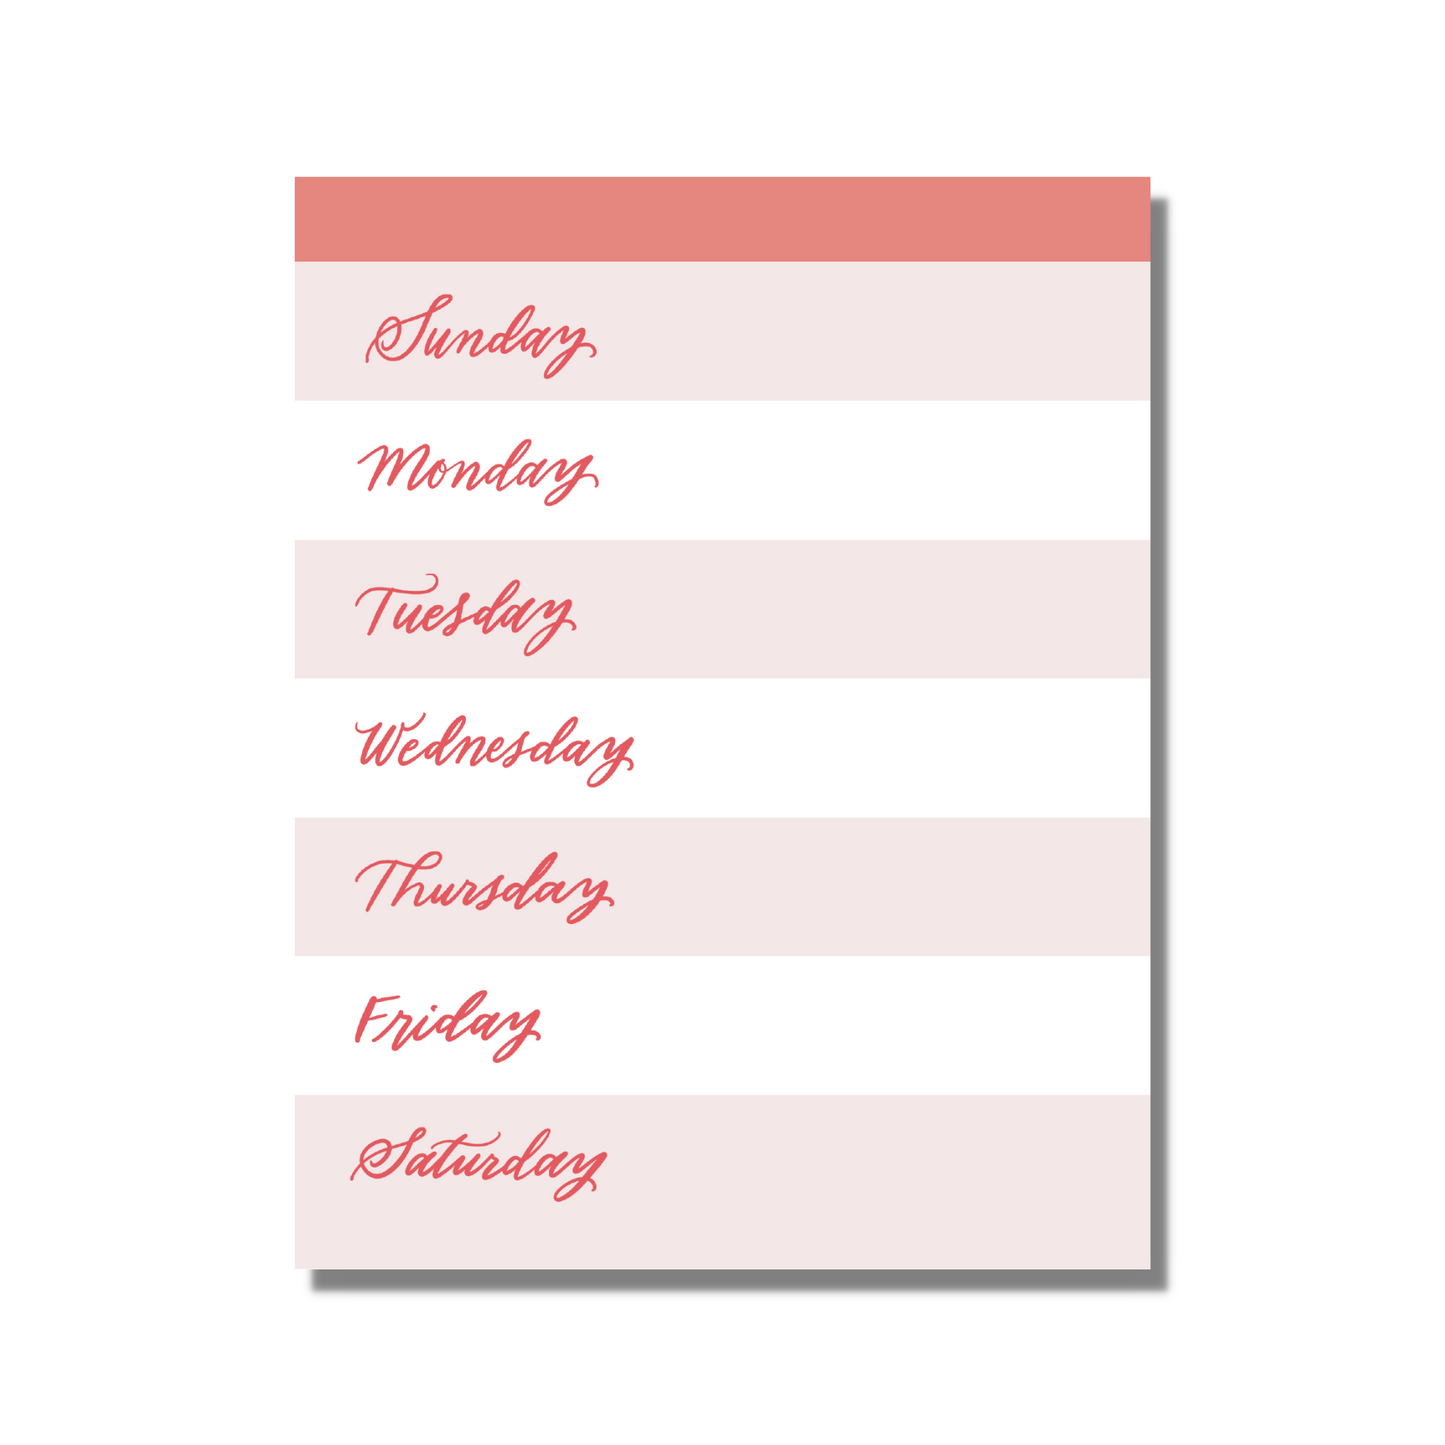 Days of the Week Notepad